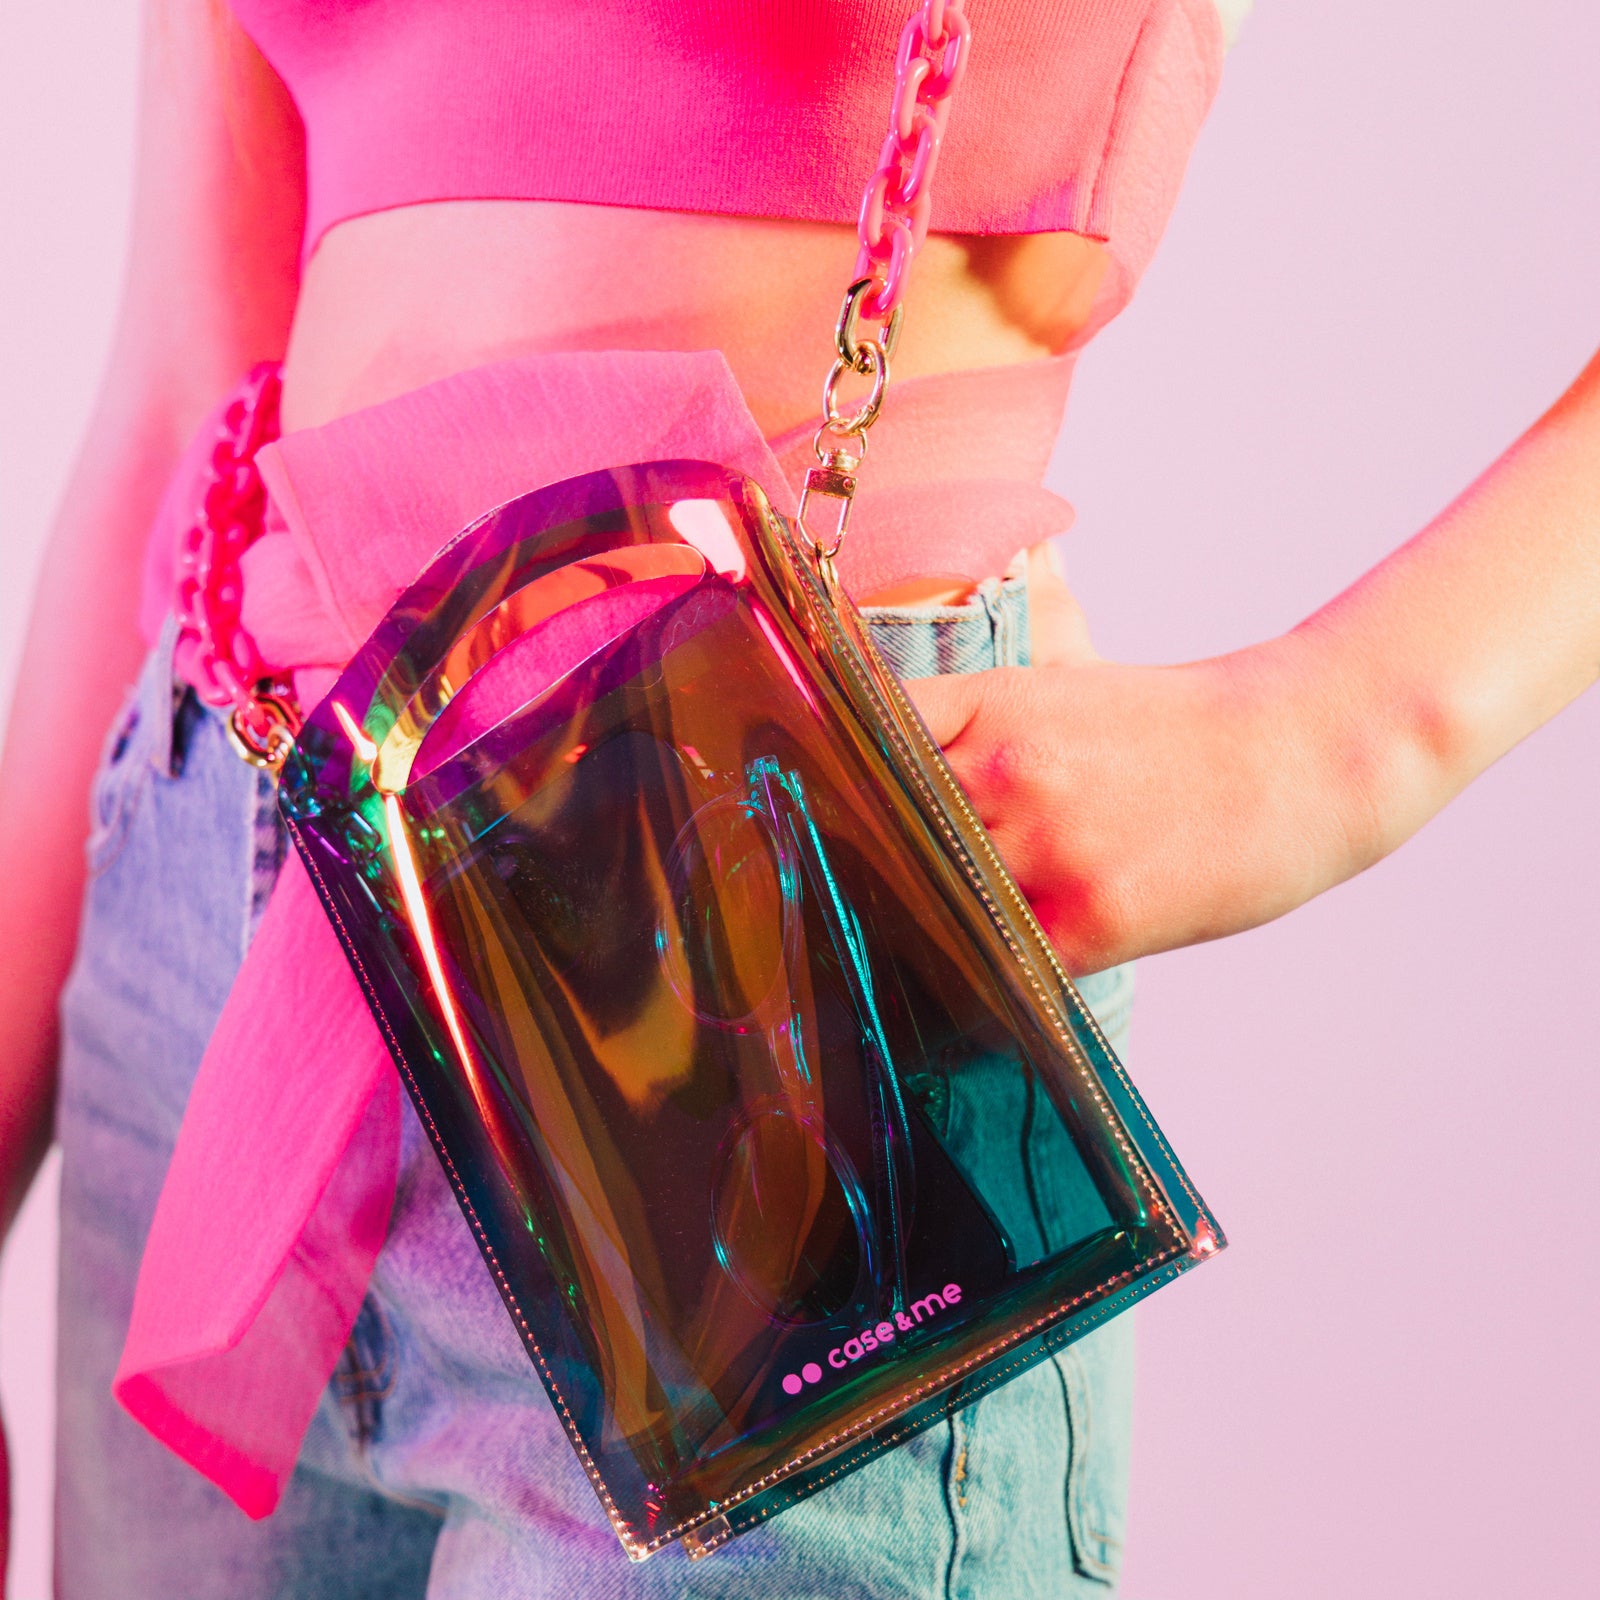 Iridescent shoulder bag for mobile phones and storage with chain